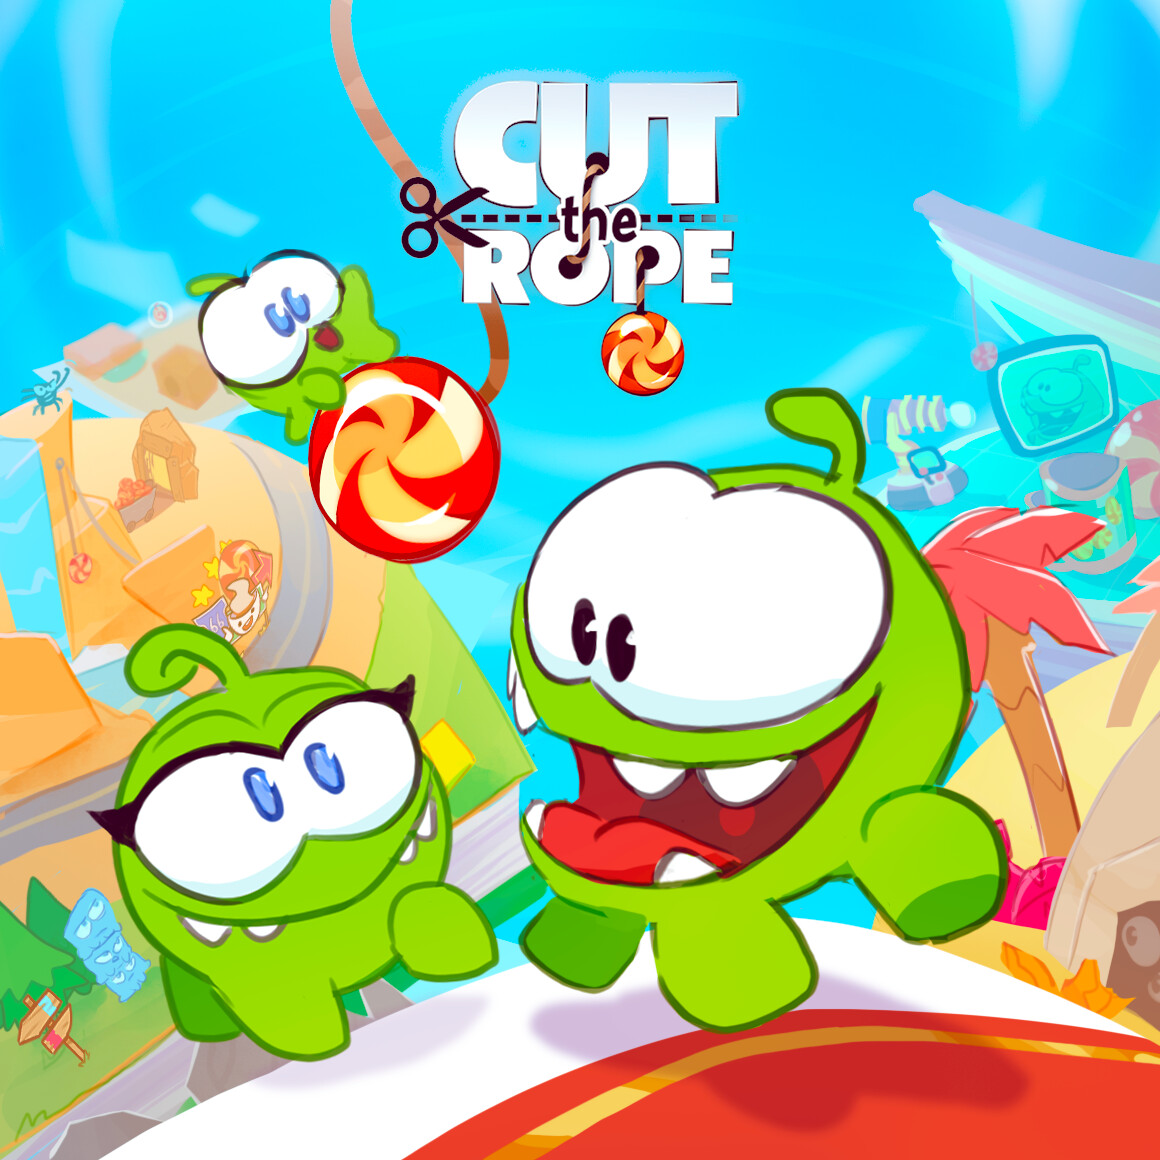 Cut The Rope Movie Fan Casting on myCast